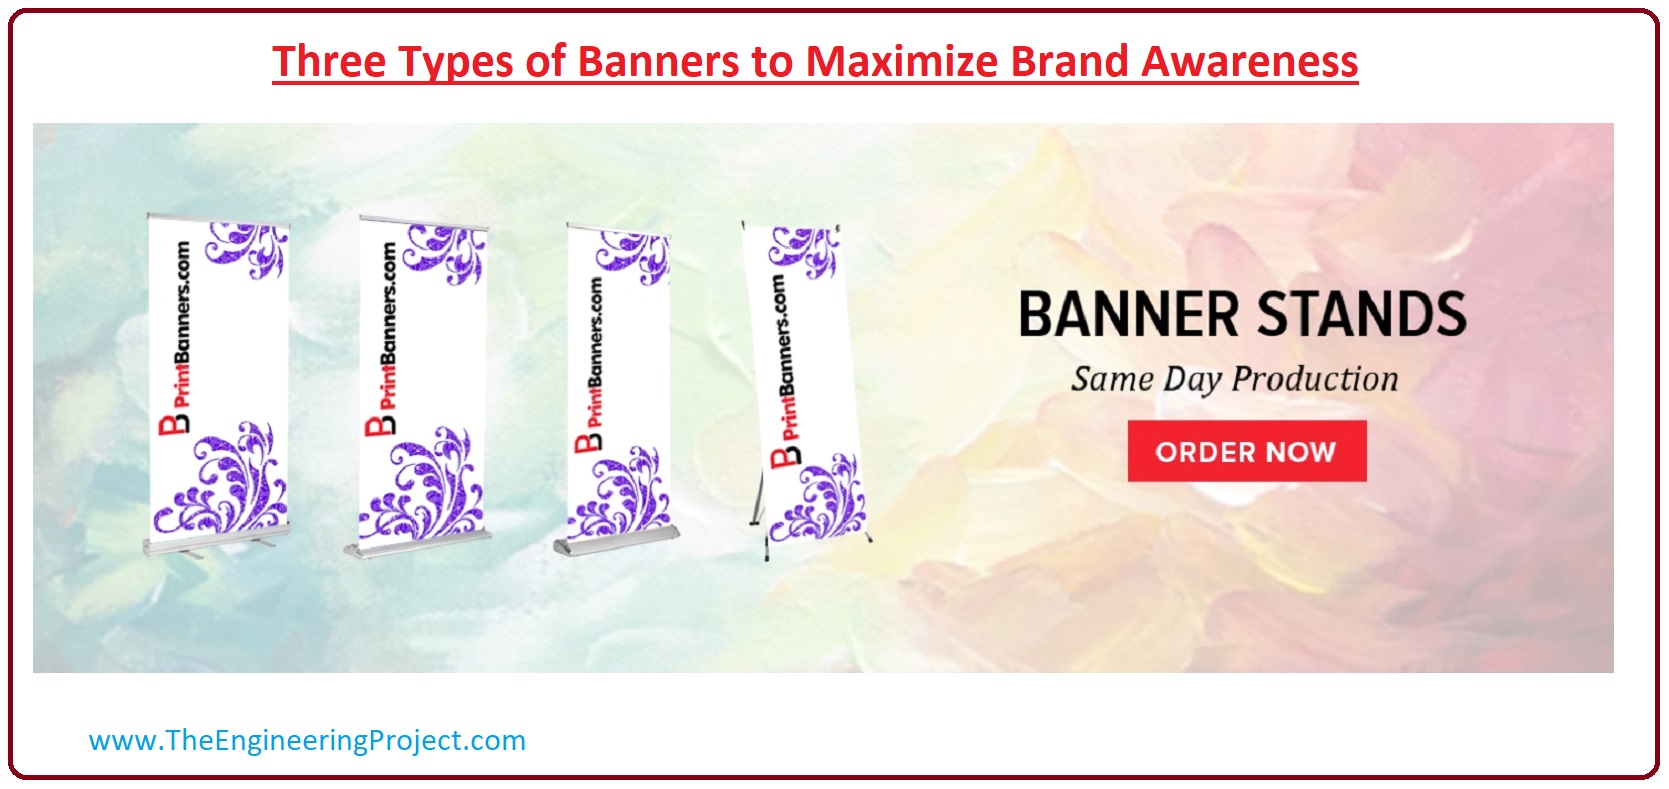 Three Types of Banners to Maximize Brand Awareness, Horizontal Banner Stands, Retractable Banner Stands, Backdrop Banner Stands